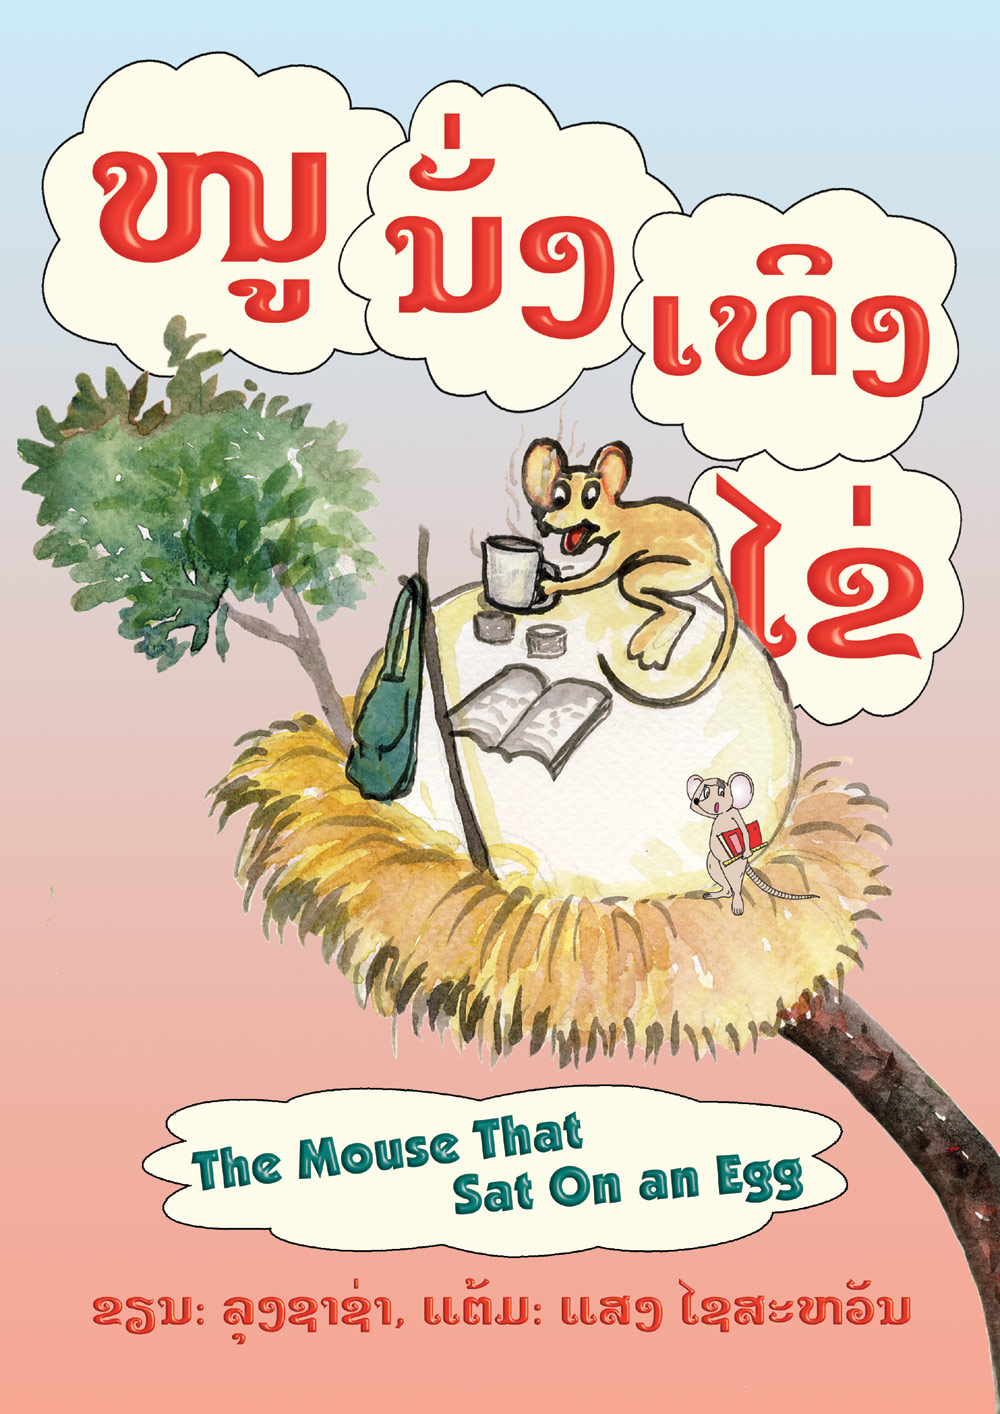 The Mouse that Sat on an Egg large book cover, published in Lao and English